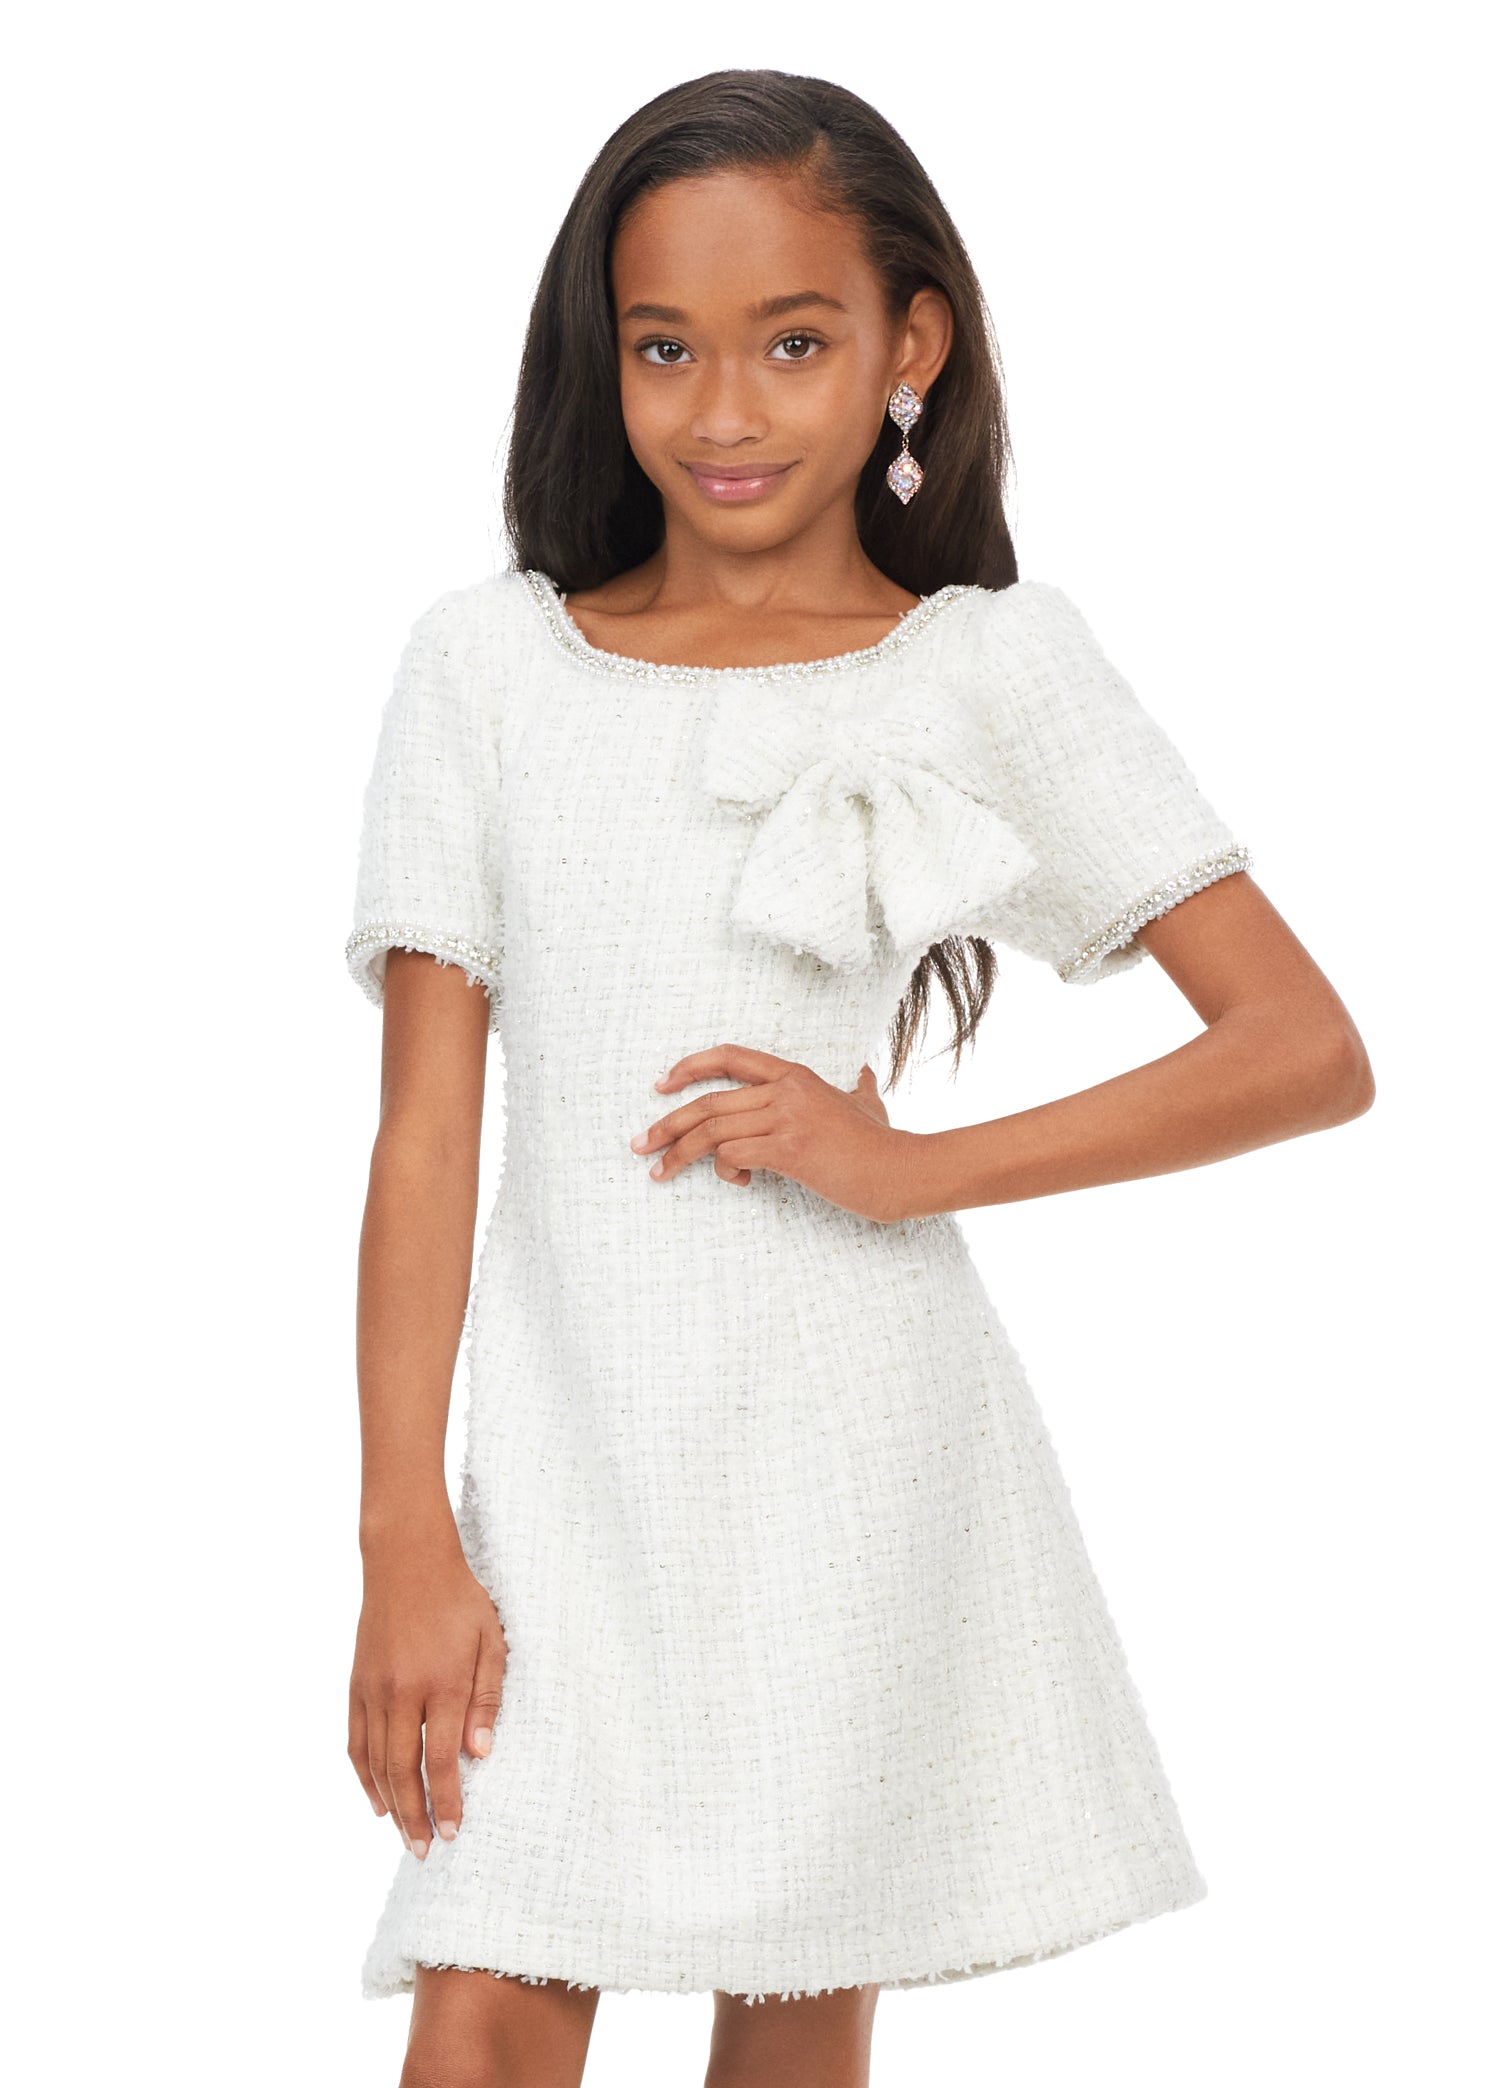 Ashley Lauren Kids 8172 Girls Tweed Cocktail Dress with Bow